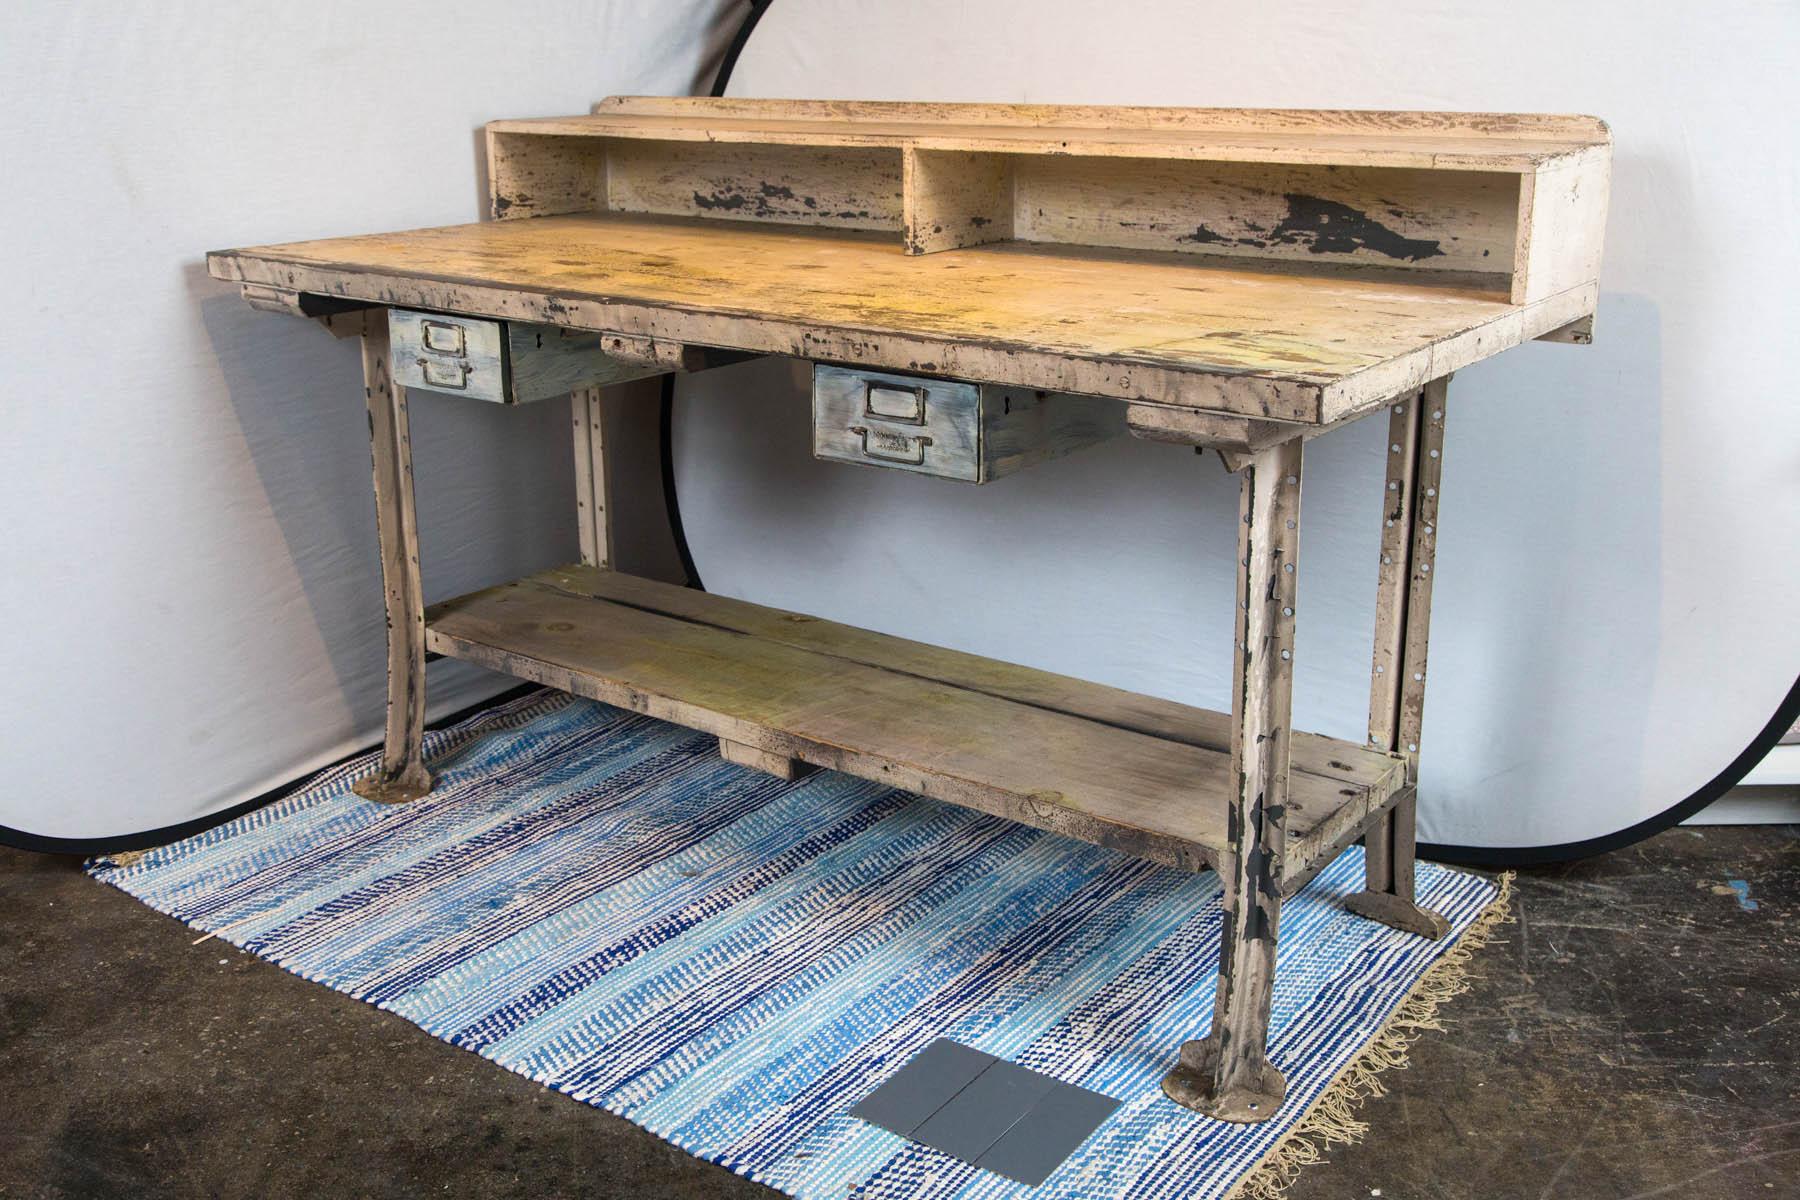 Steel leg wood top workstation with cubbyholes and drawers.